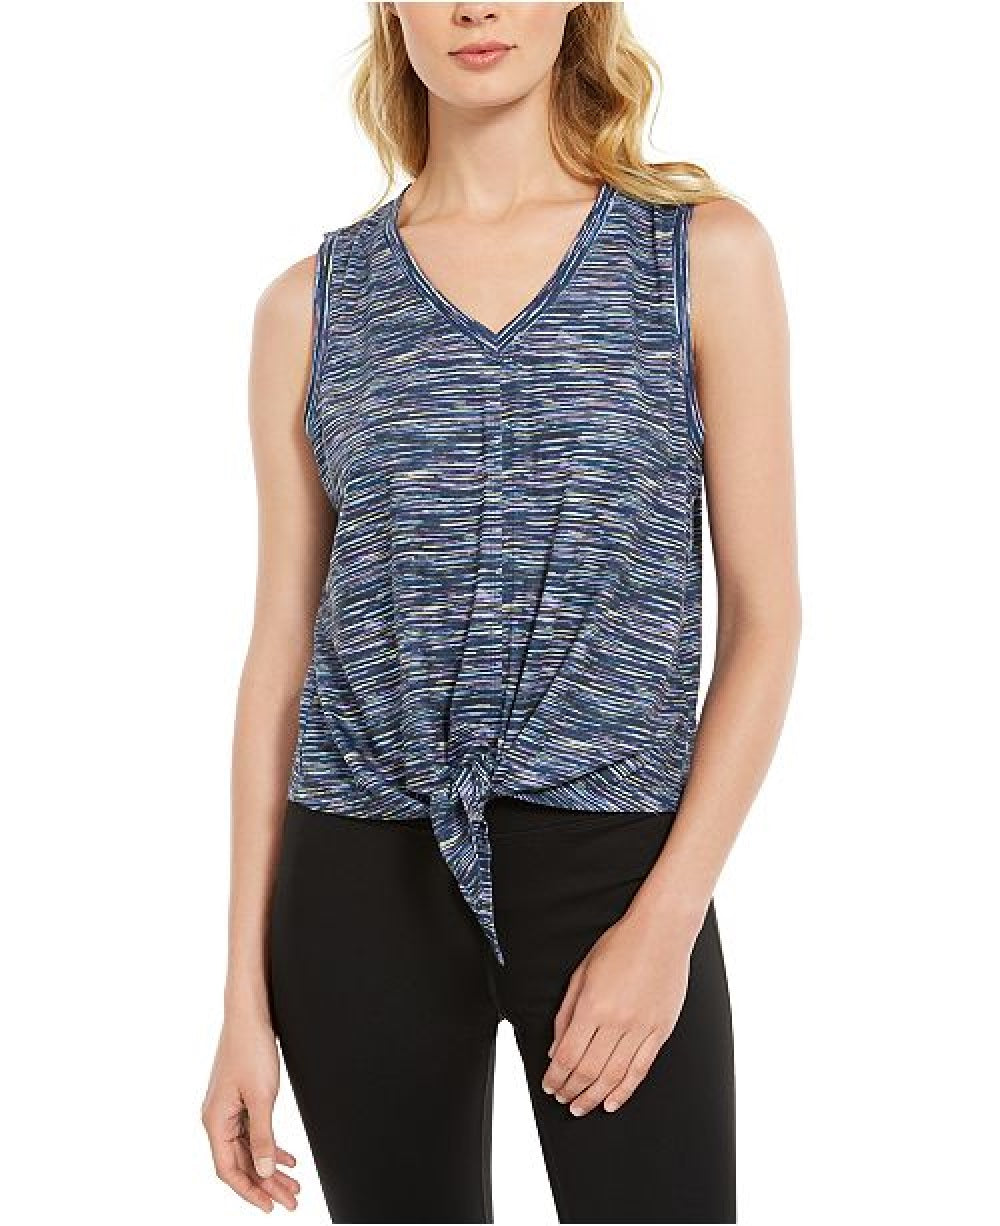 Ideology Women's Striped Tie-Front Tank Top Navy Size Large